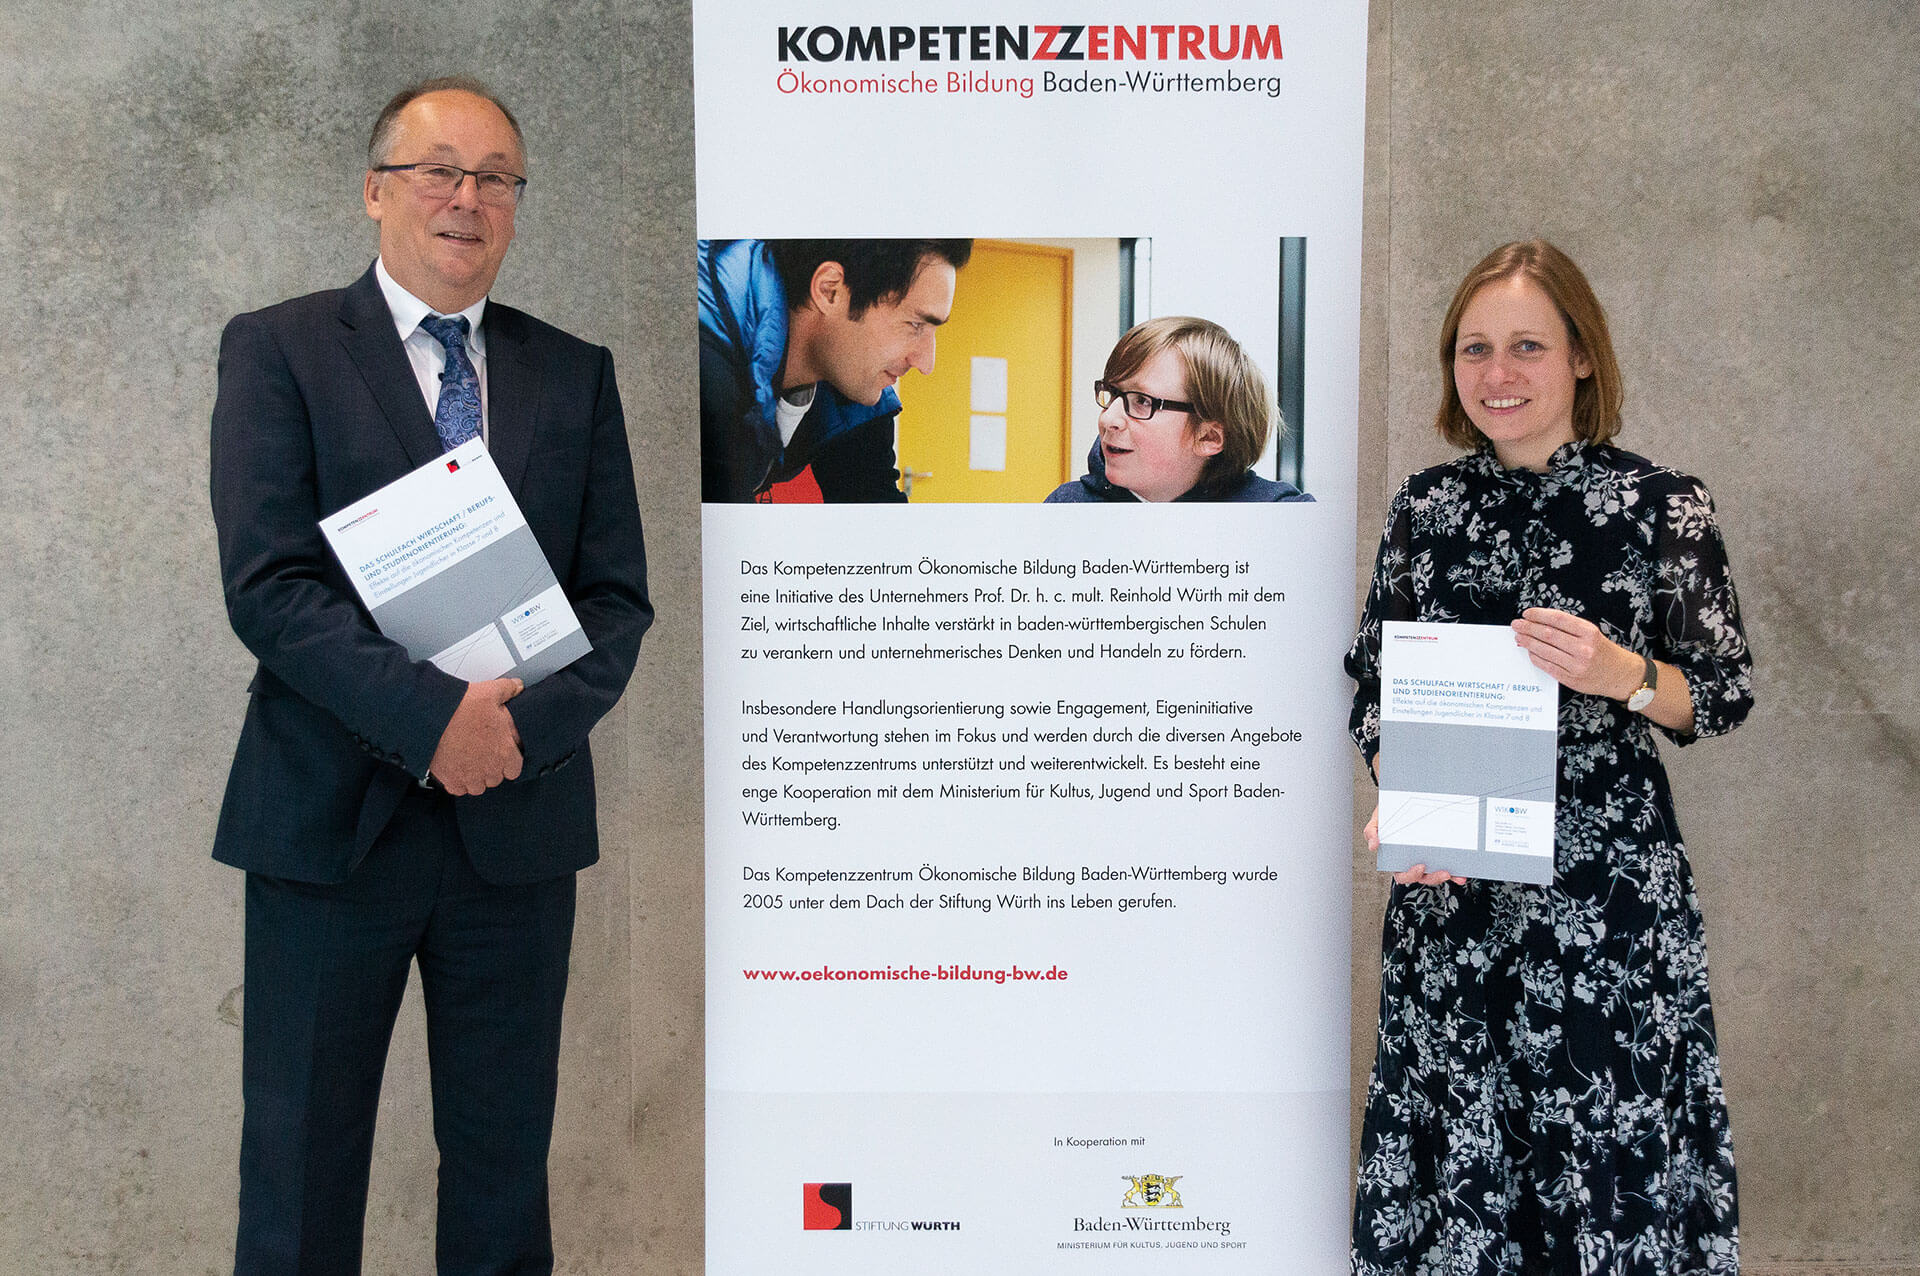 Seventh and eighth graders who study the subject of economics in vocational and higher education are more interested in the world of business. Prof. Dr. Günther Seeber from the University of Koblenz-Landau hands the economic literacy study over to Stefanie Hagenmüller, Head of the Competence Center for Economic Education.